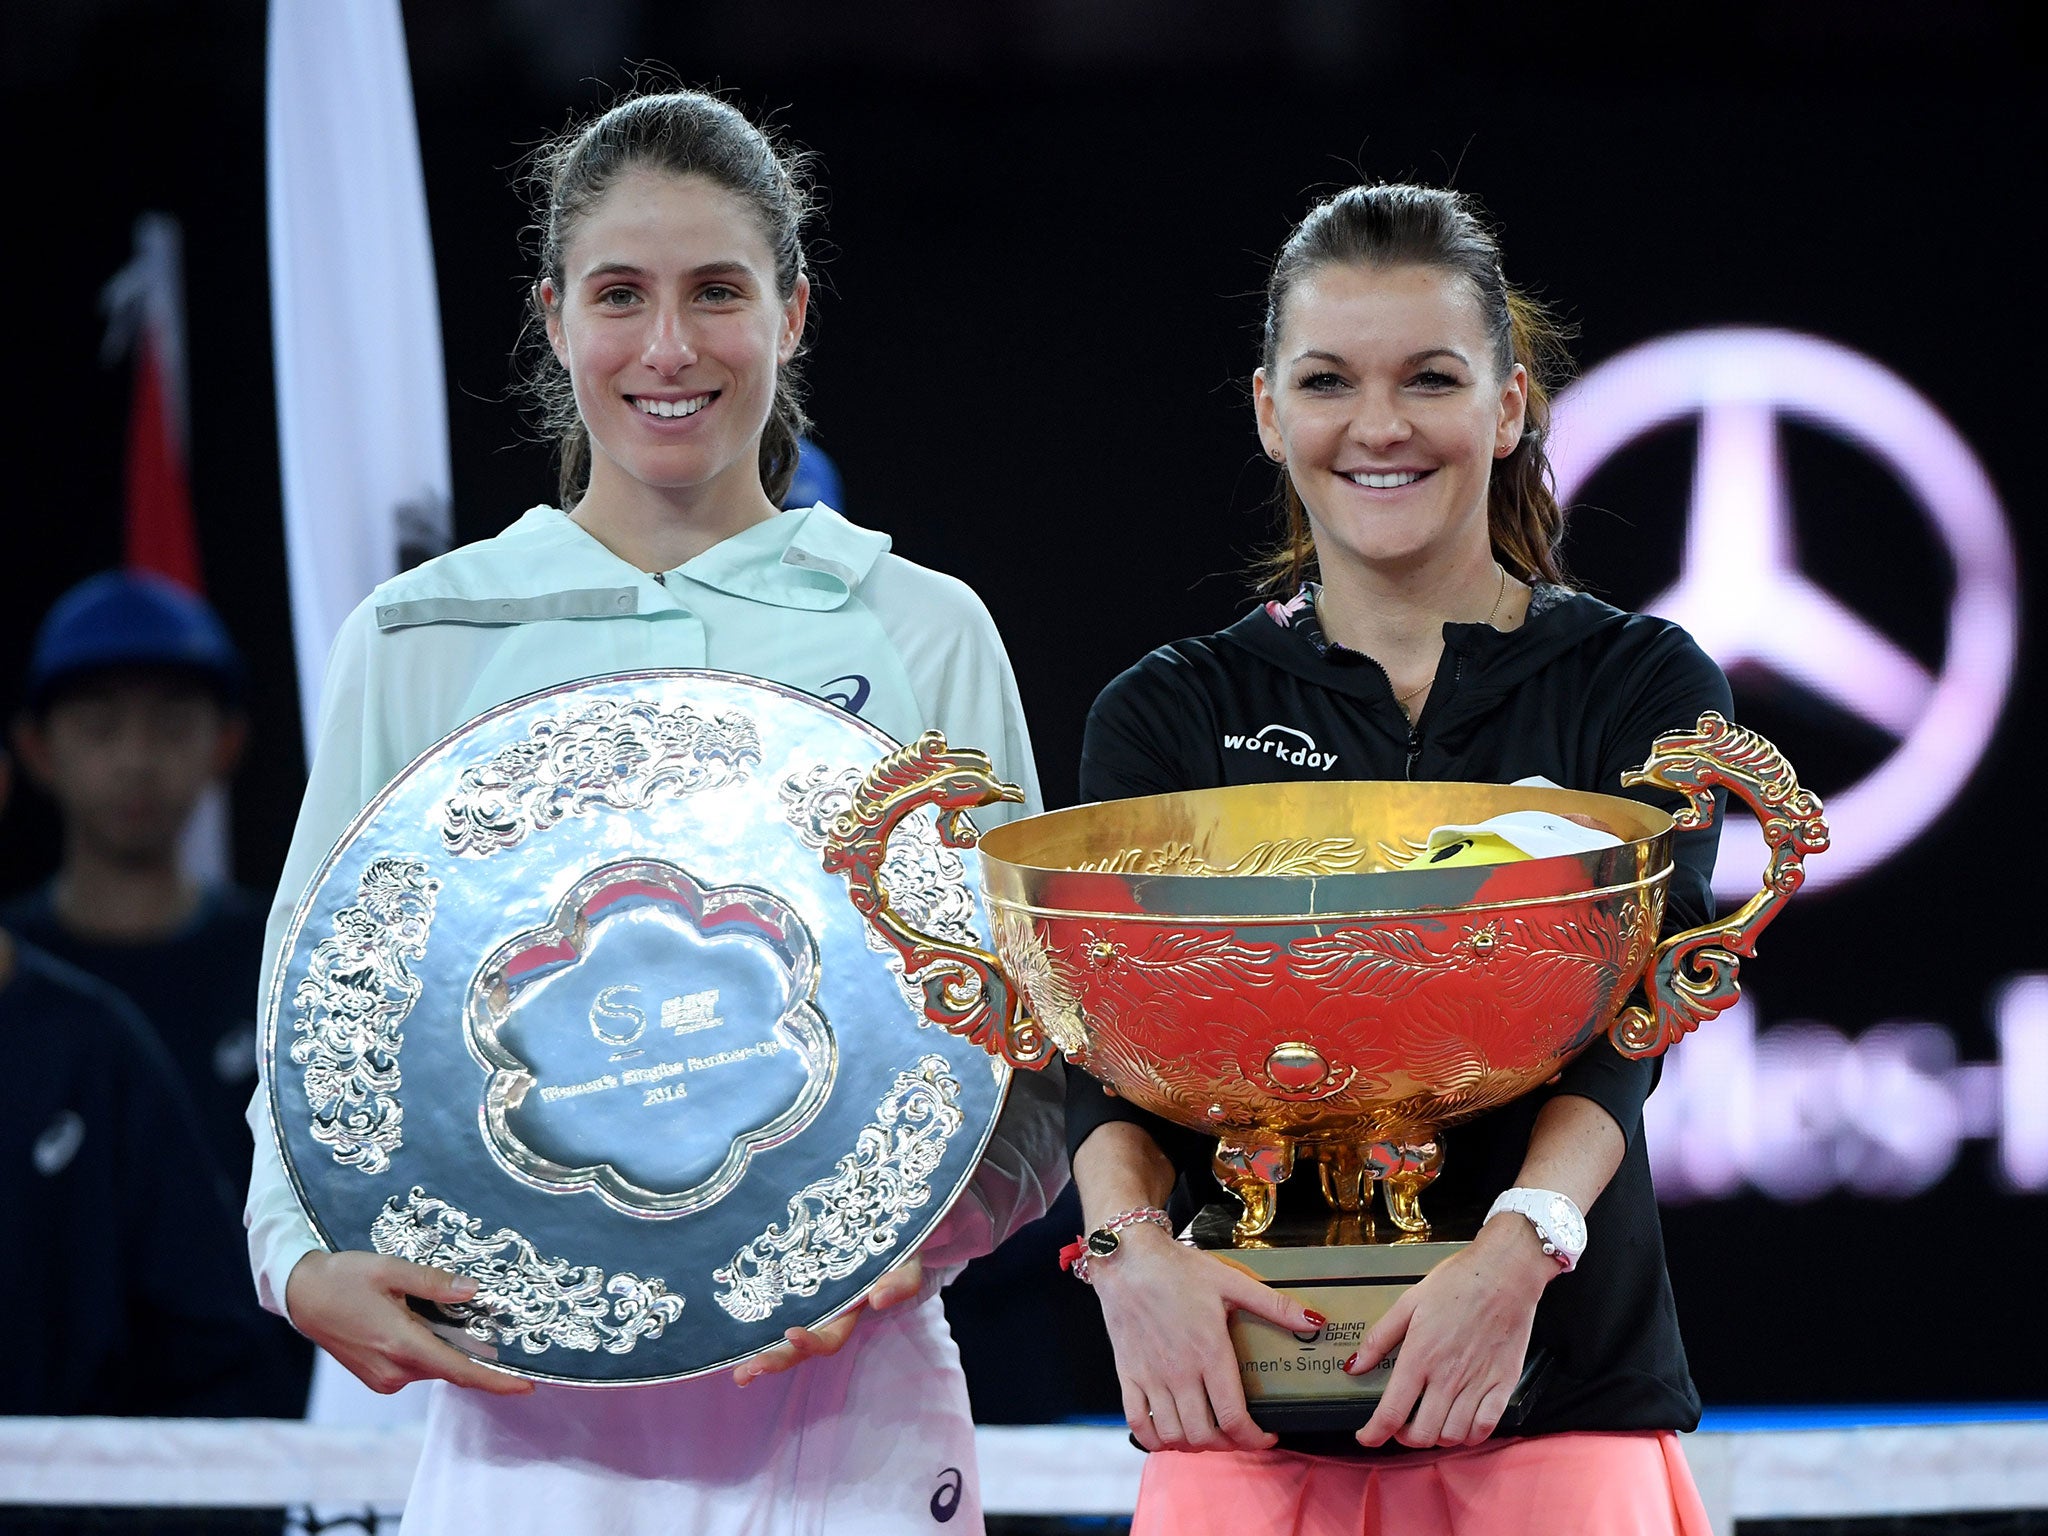 Agnieszka Radwanska of Poland and Johanna Konta of Britain together during the awards ceremony after the women's singles final of the China Open tennis tournament in Beijing.